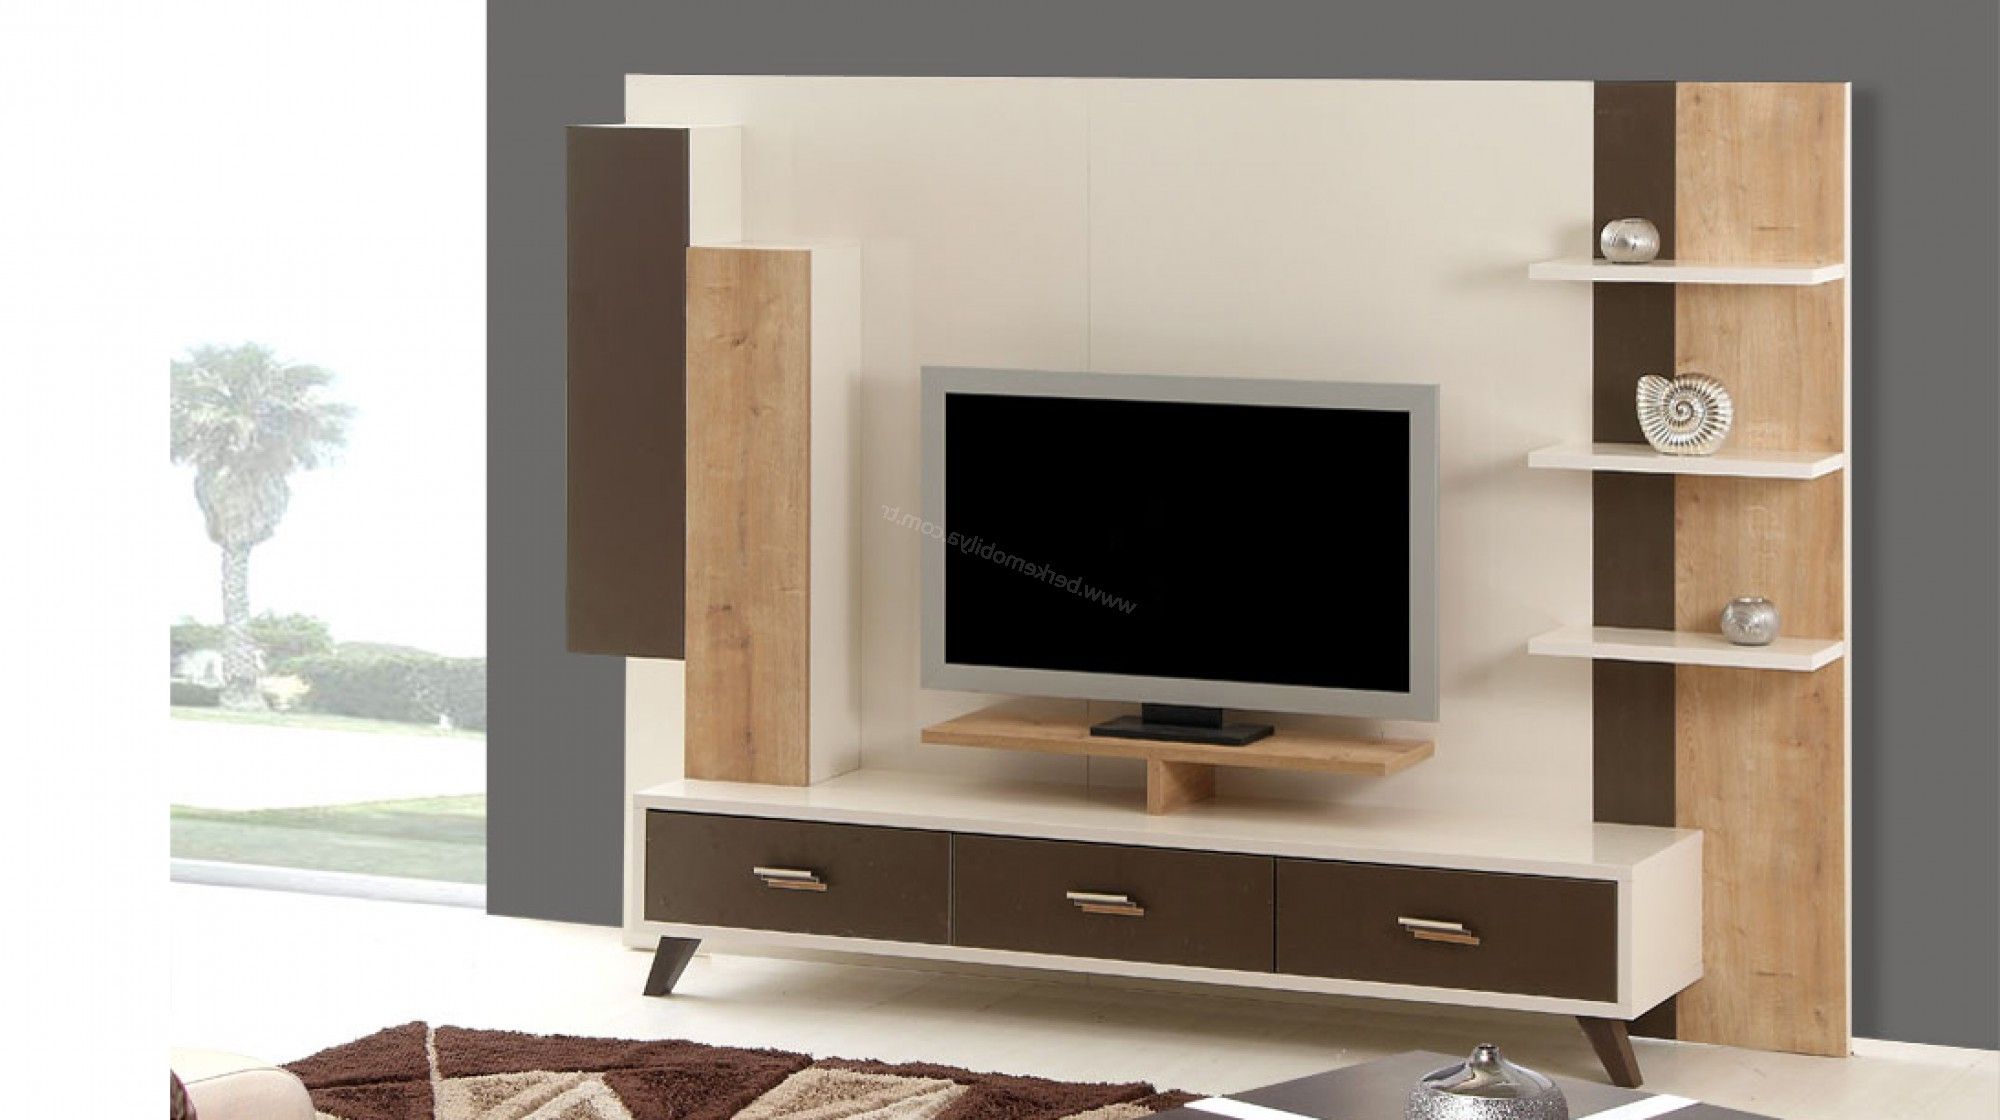 Tv Stand For Kids Room Rca Slumberland Stands Black With Glass Doors Intended For Recent Baby Proof Contemporary Tv Cabinets (View 14 of 20)